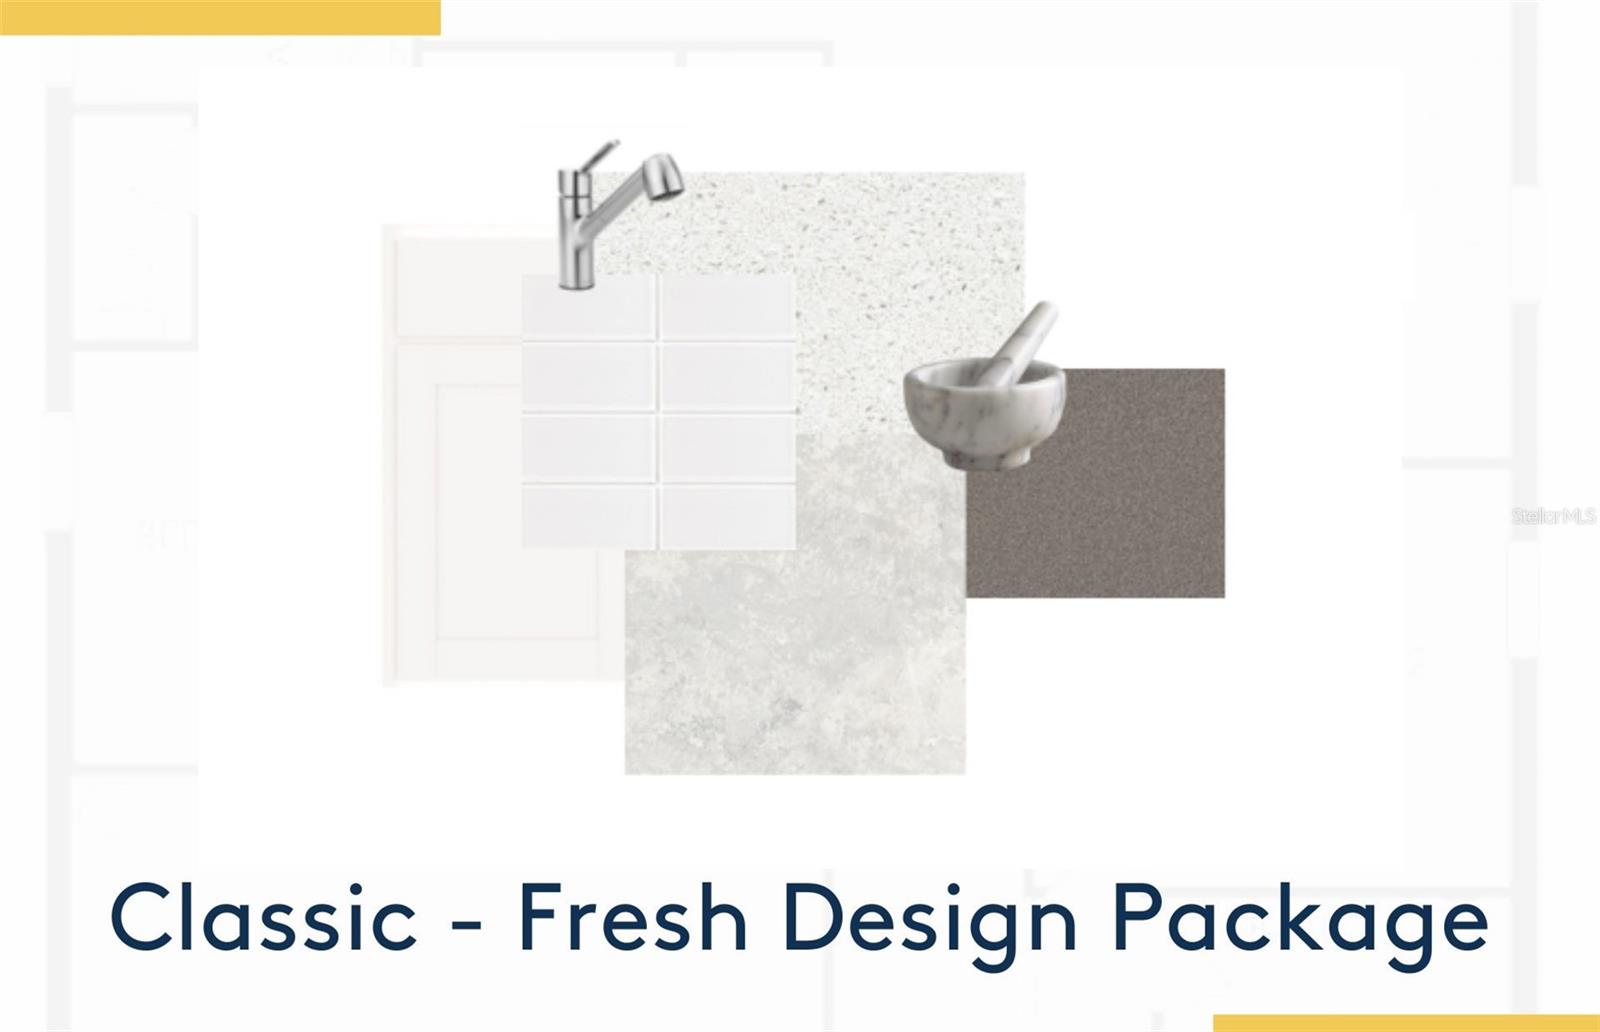 Design Package